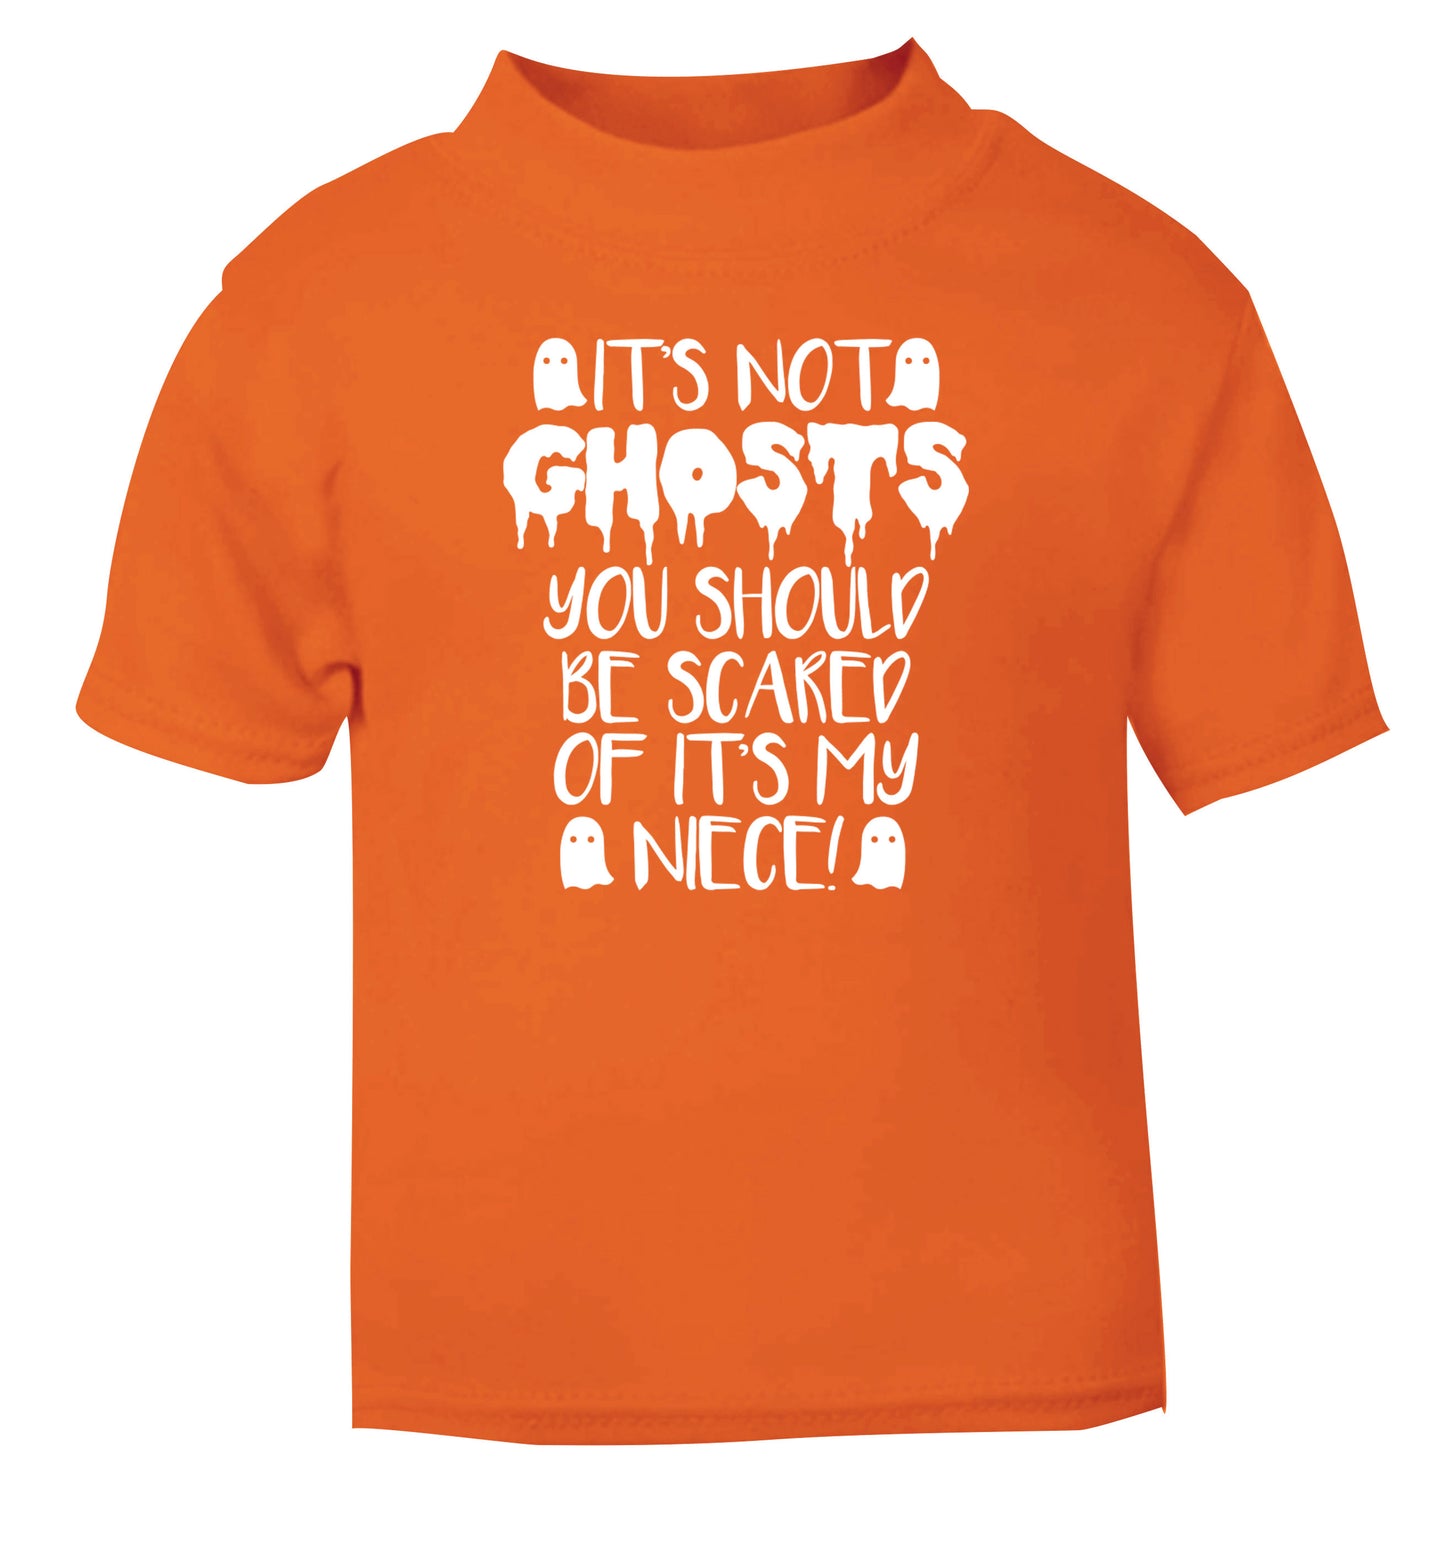 It's not ghosts you should be scared of it's my niece! orange Baby Toddler Tshirt 2 Years